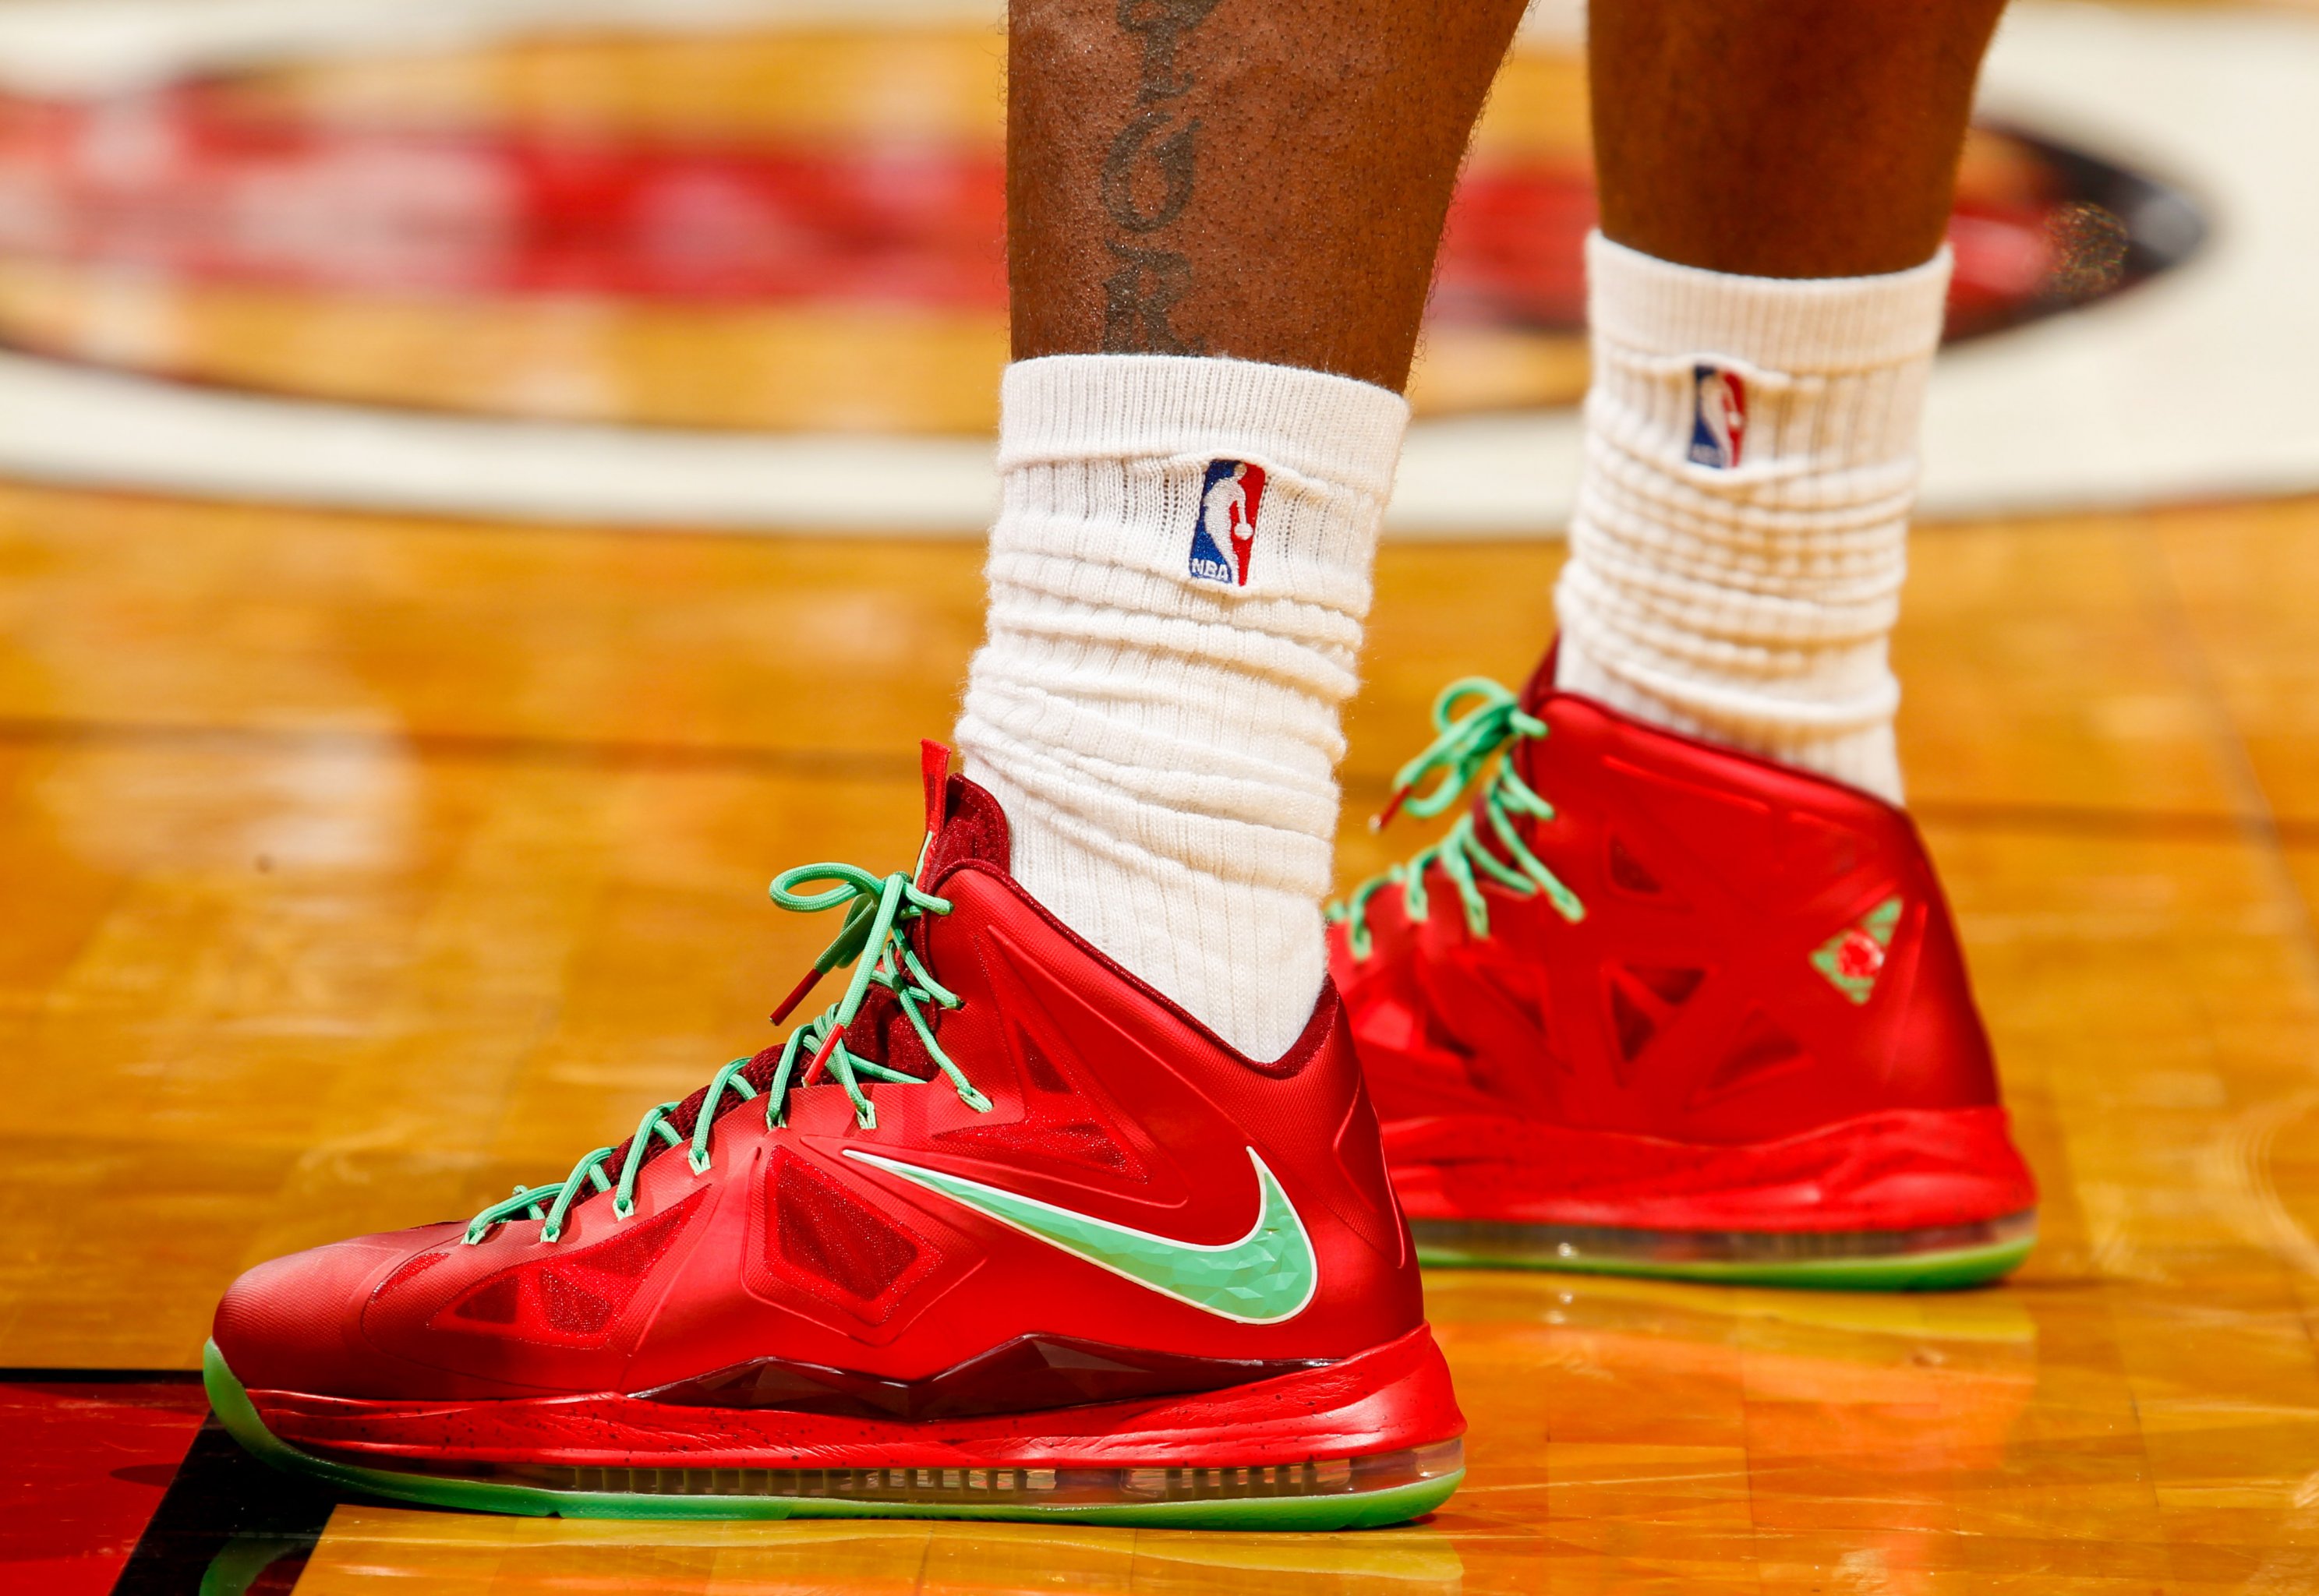 Gallery: NBA's Christmas Day sneakers - Sports Illustrated